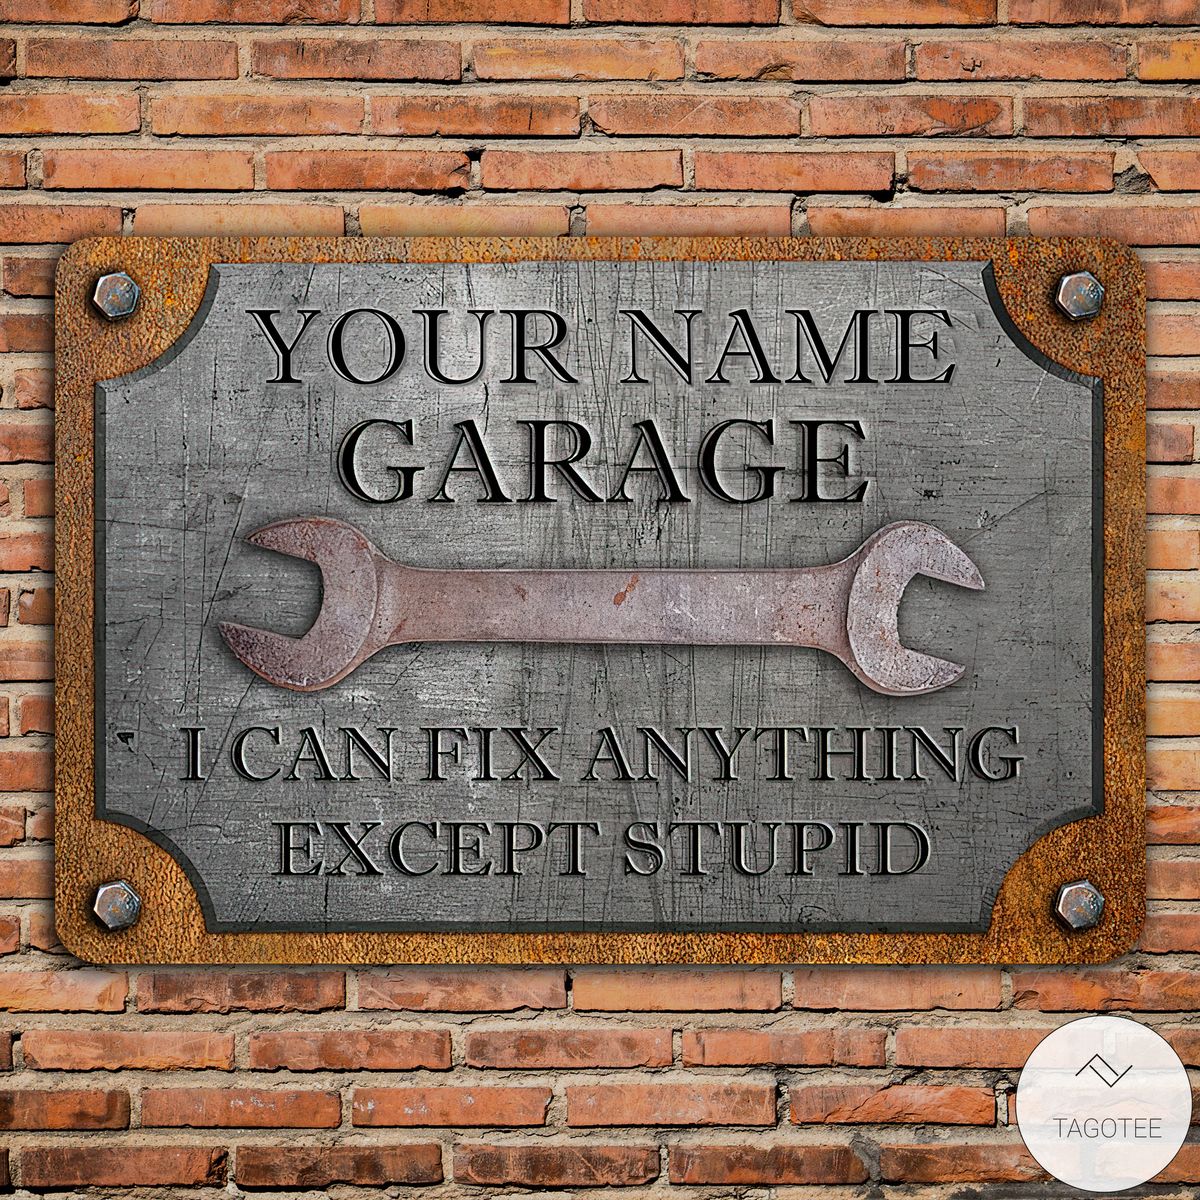 Personalized-Garage-Sign-I-Can-Fix-Anything-Except-Stupid-Metal-Sign